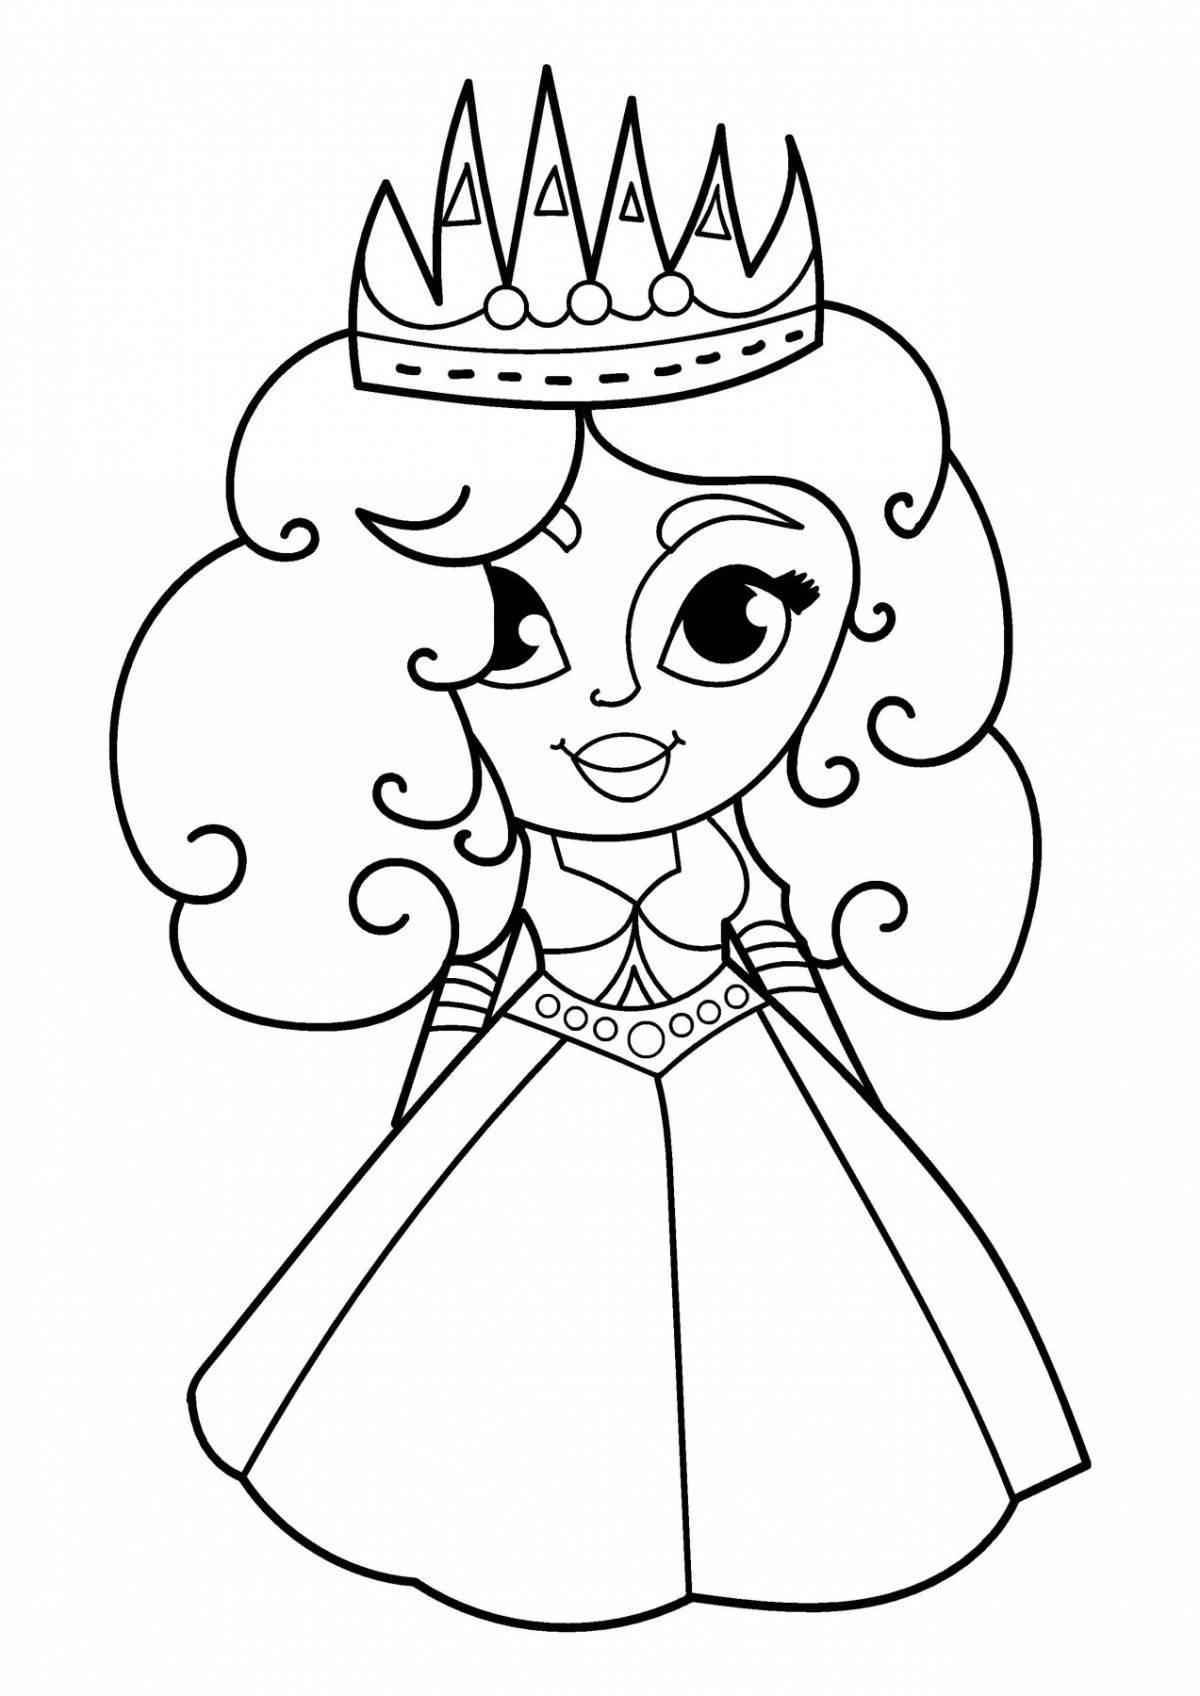 Exquisite coloring book for 3 year old girls, princess